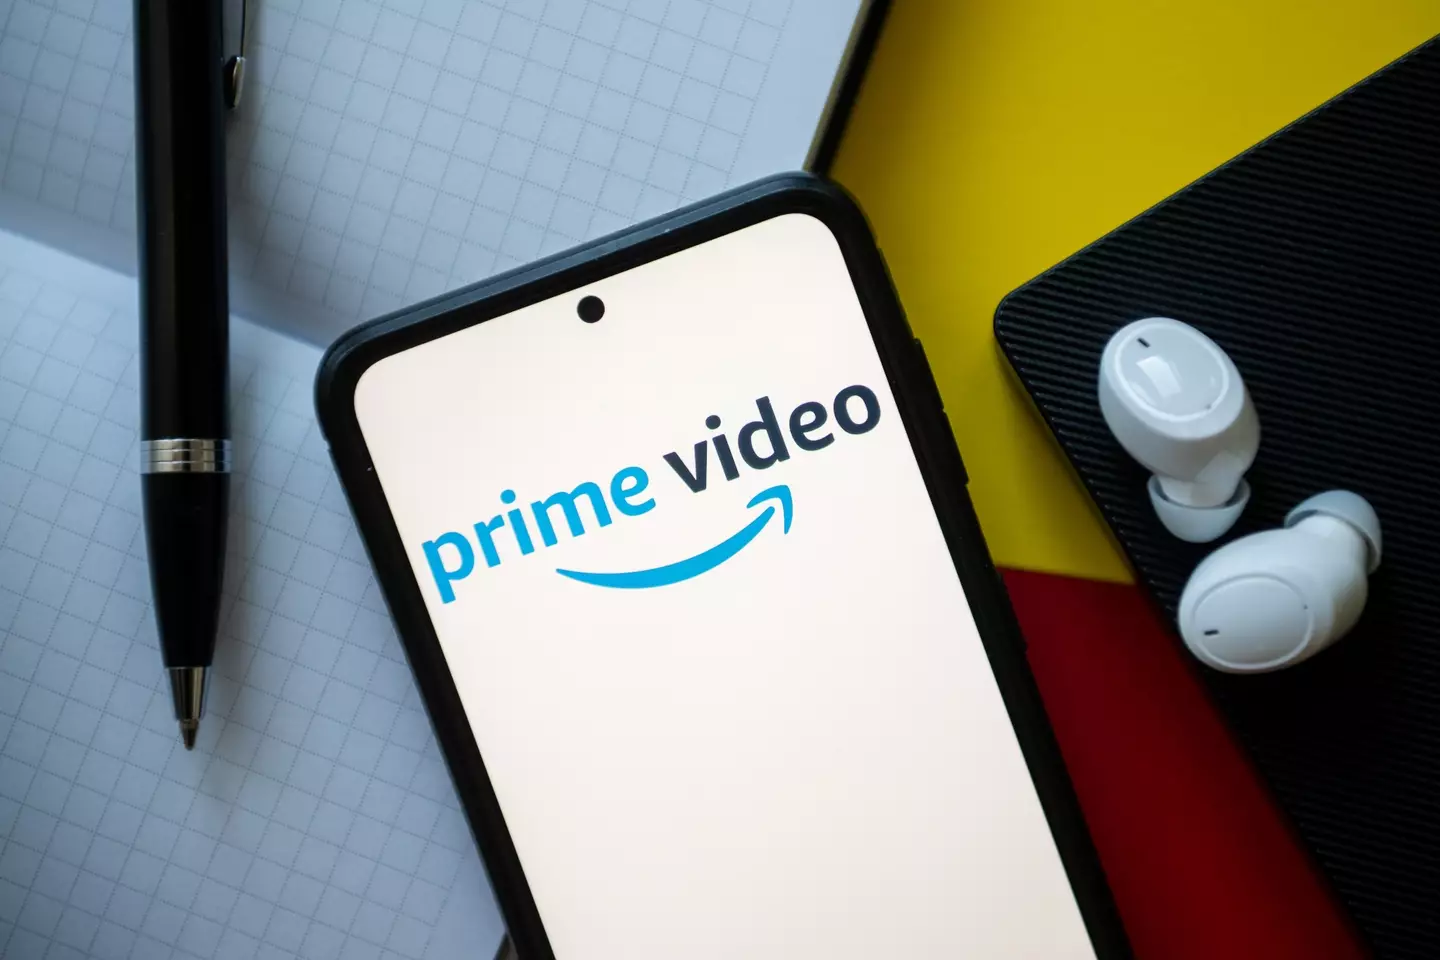 Prime Video will cost more to stay ad-free.